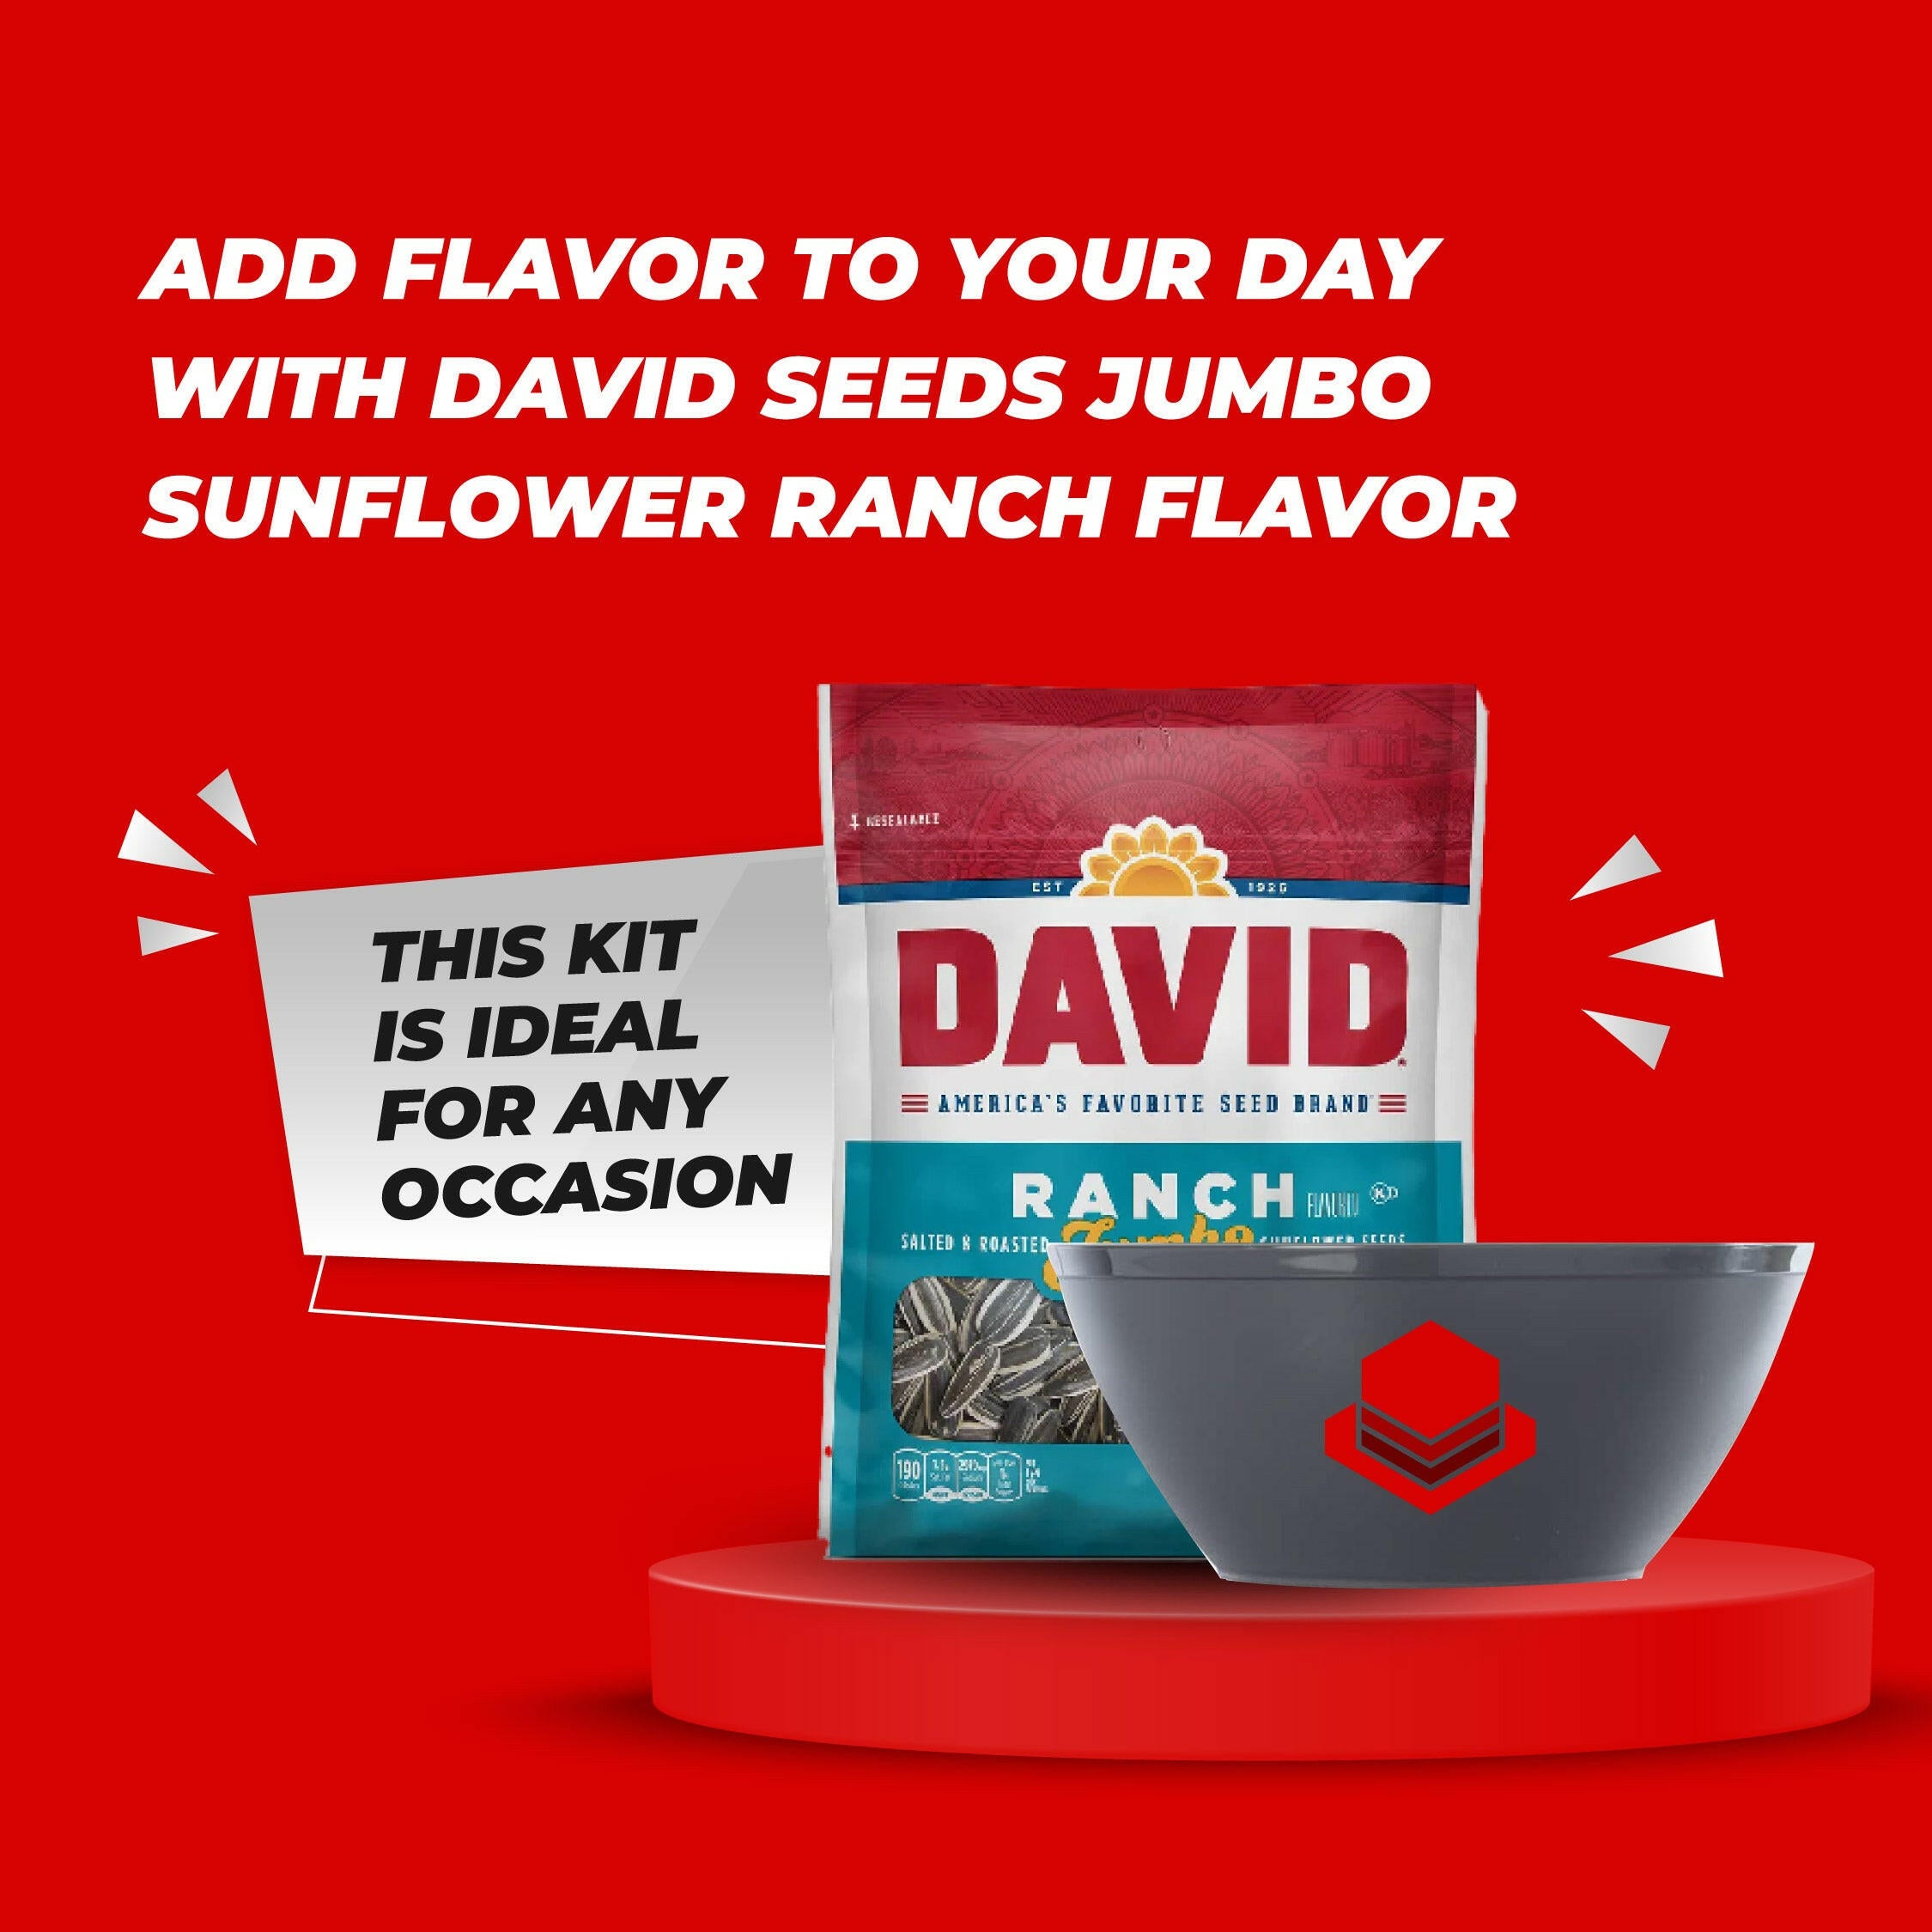 15 David Ranch Jumbo Sunflower Seeds 5.25oz + 3 Plastic Stackable Reusable Catsa Essentials, BPA-Free, Made in the USA, Dishwasher Safe Dinnerware, 28 oz with Catsa Essentials Pack Box